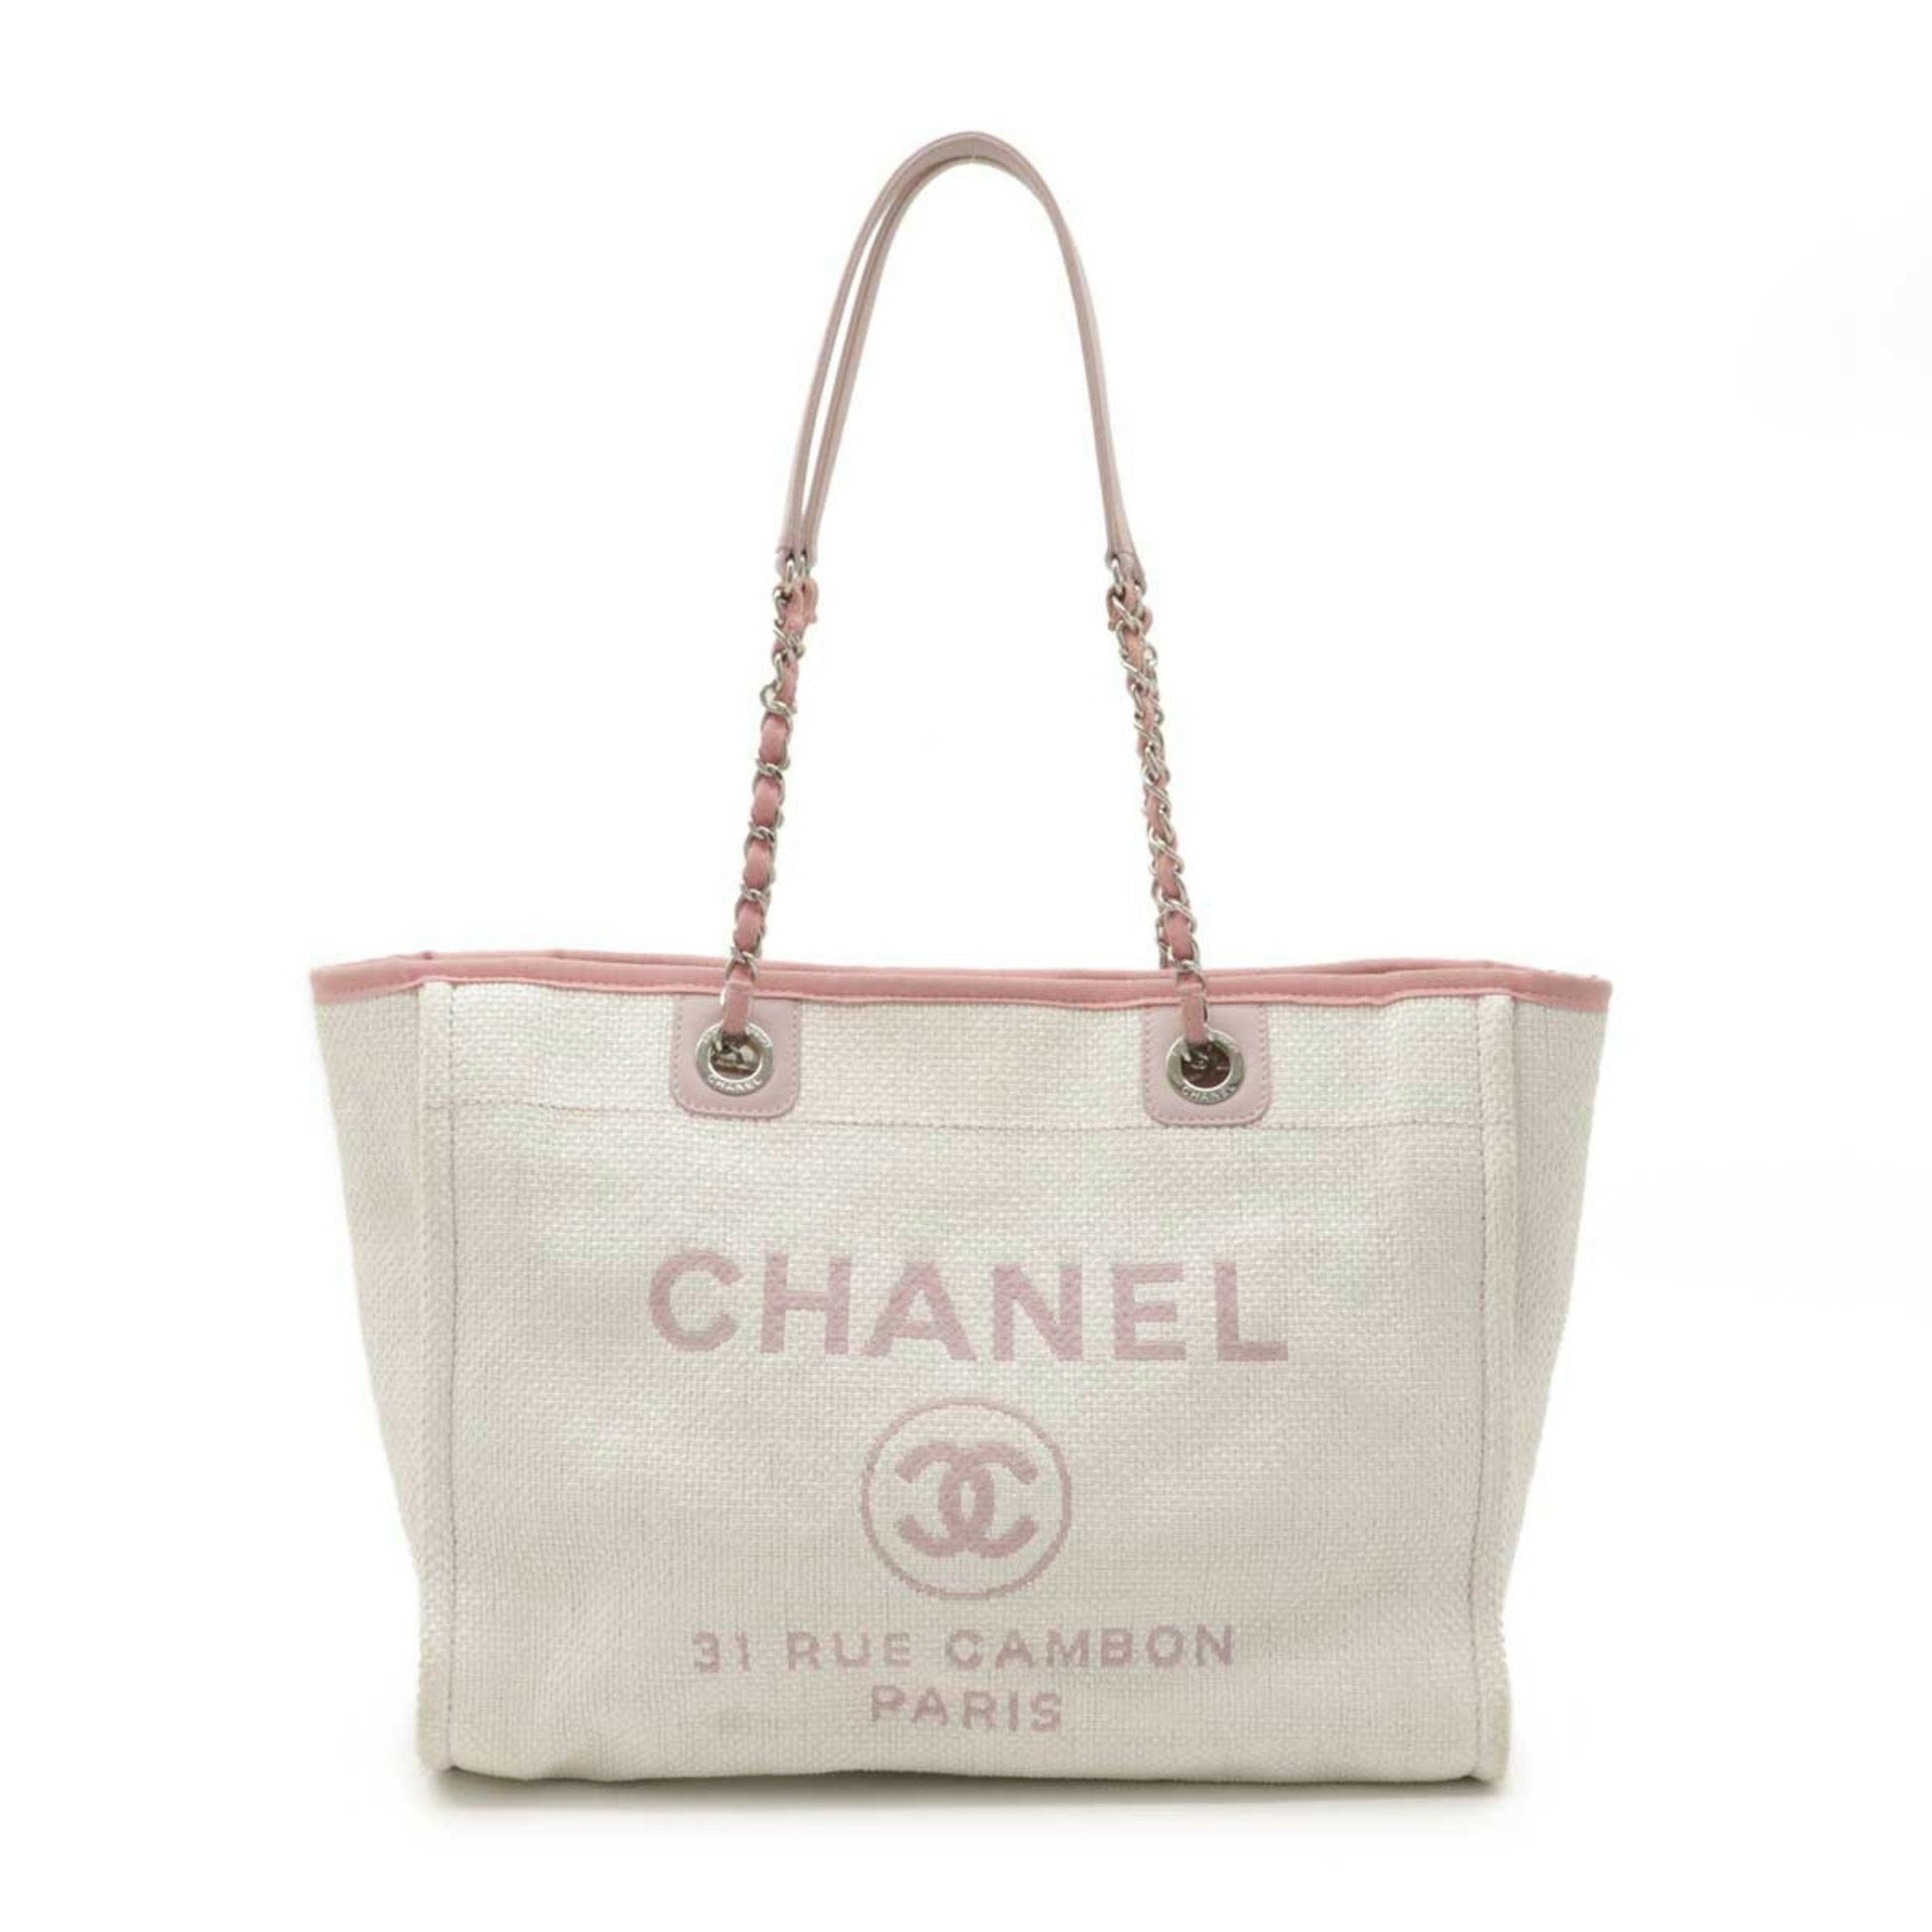 Chanel Deauville Straw mm Tote Bag in Army,Tan